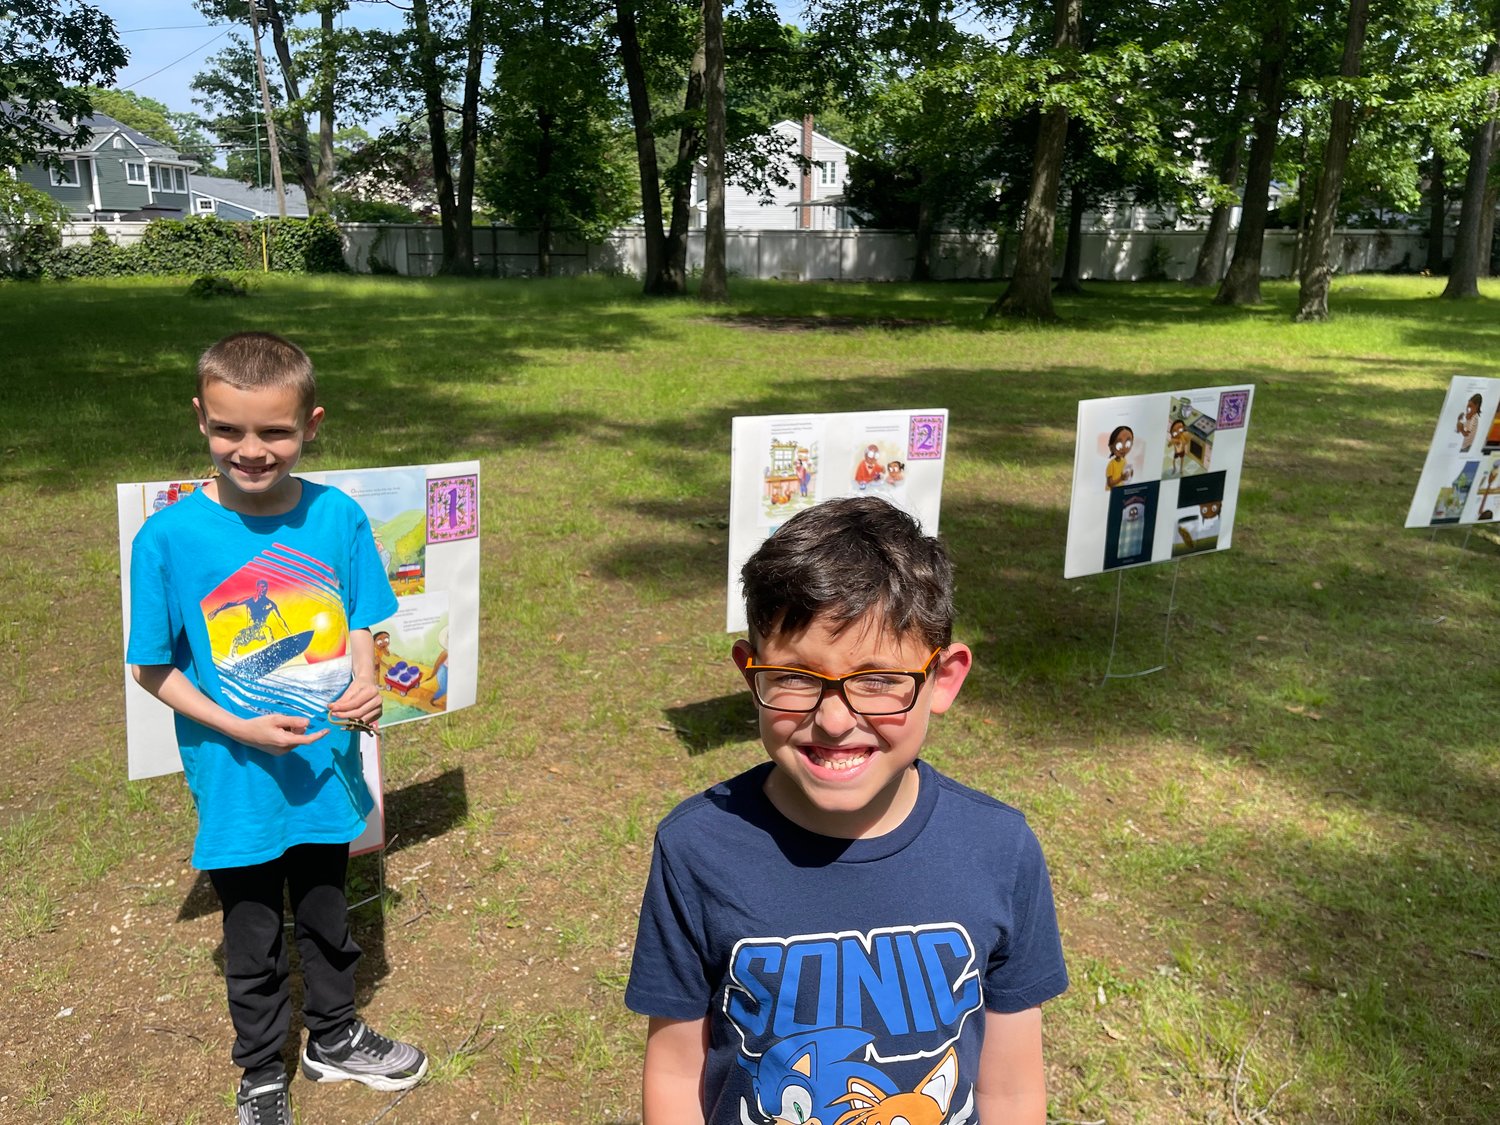 The walks are accessible before and after school, and families who sent a photo of themselves on the walk to the library were able to win a free book. A.J. and Jaxson Cipriano were two of the contest winners.